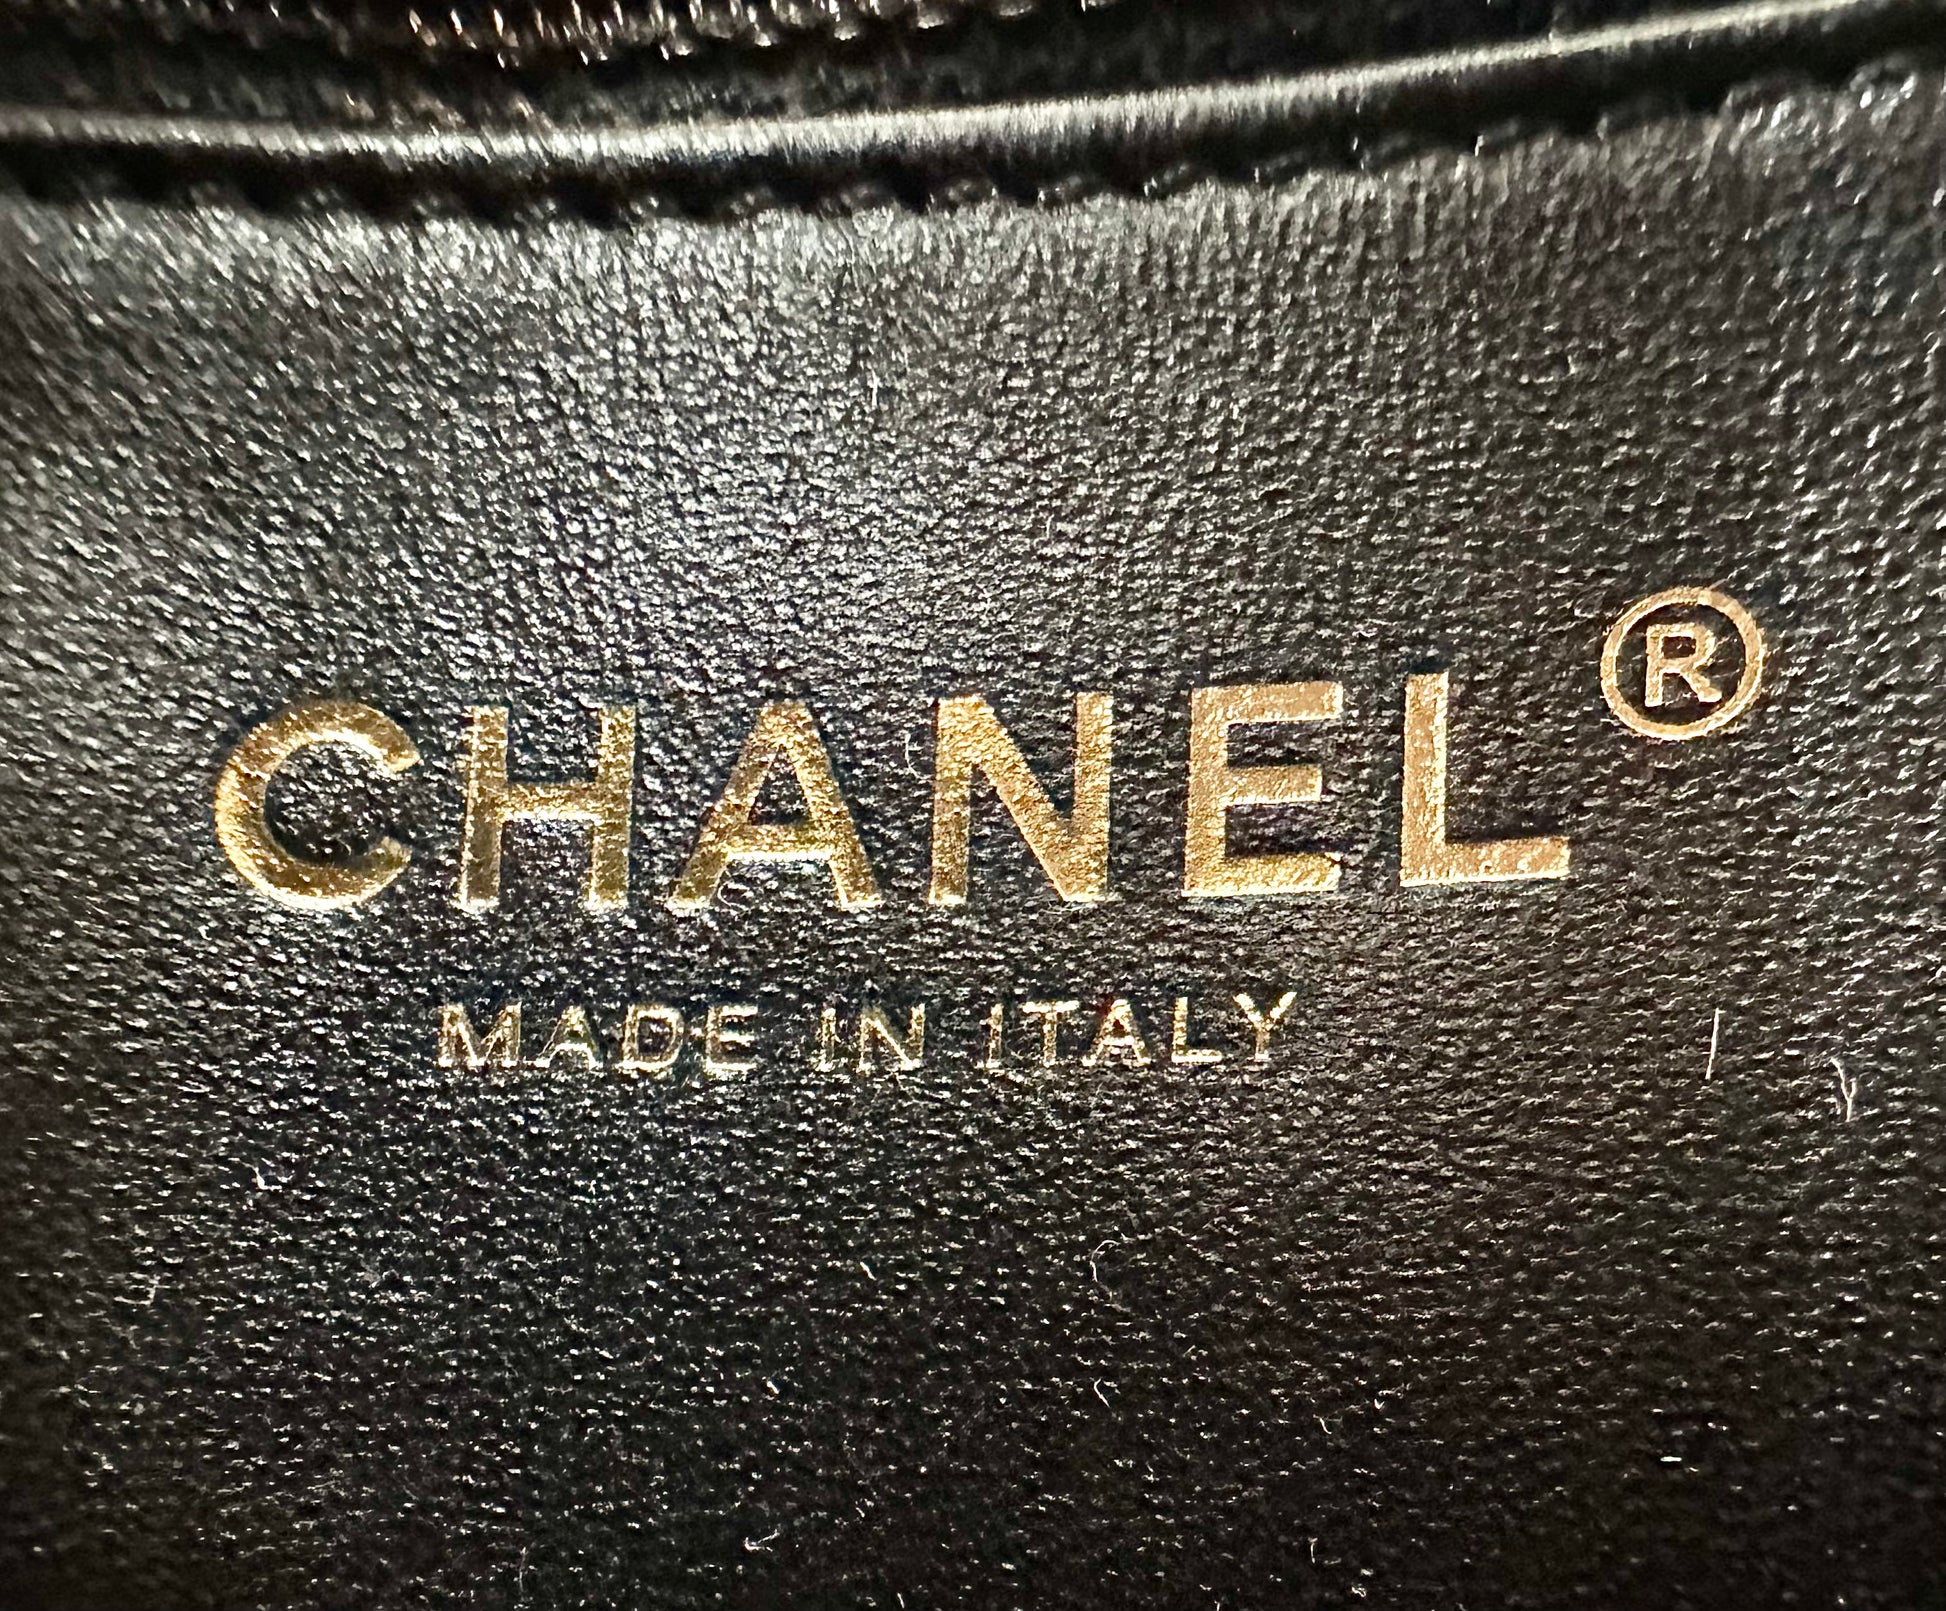 Chanel logo on inside of bag with Made in Italy below it.